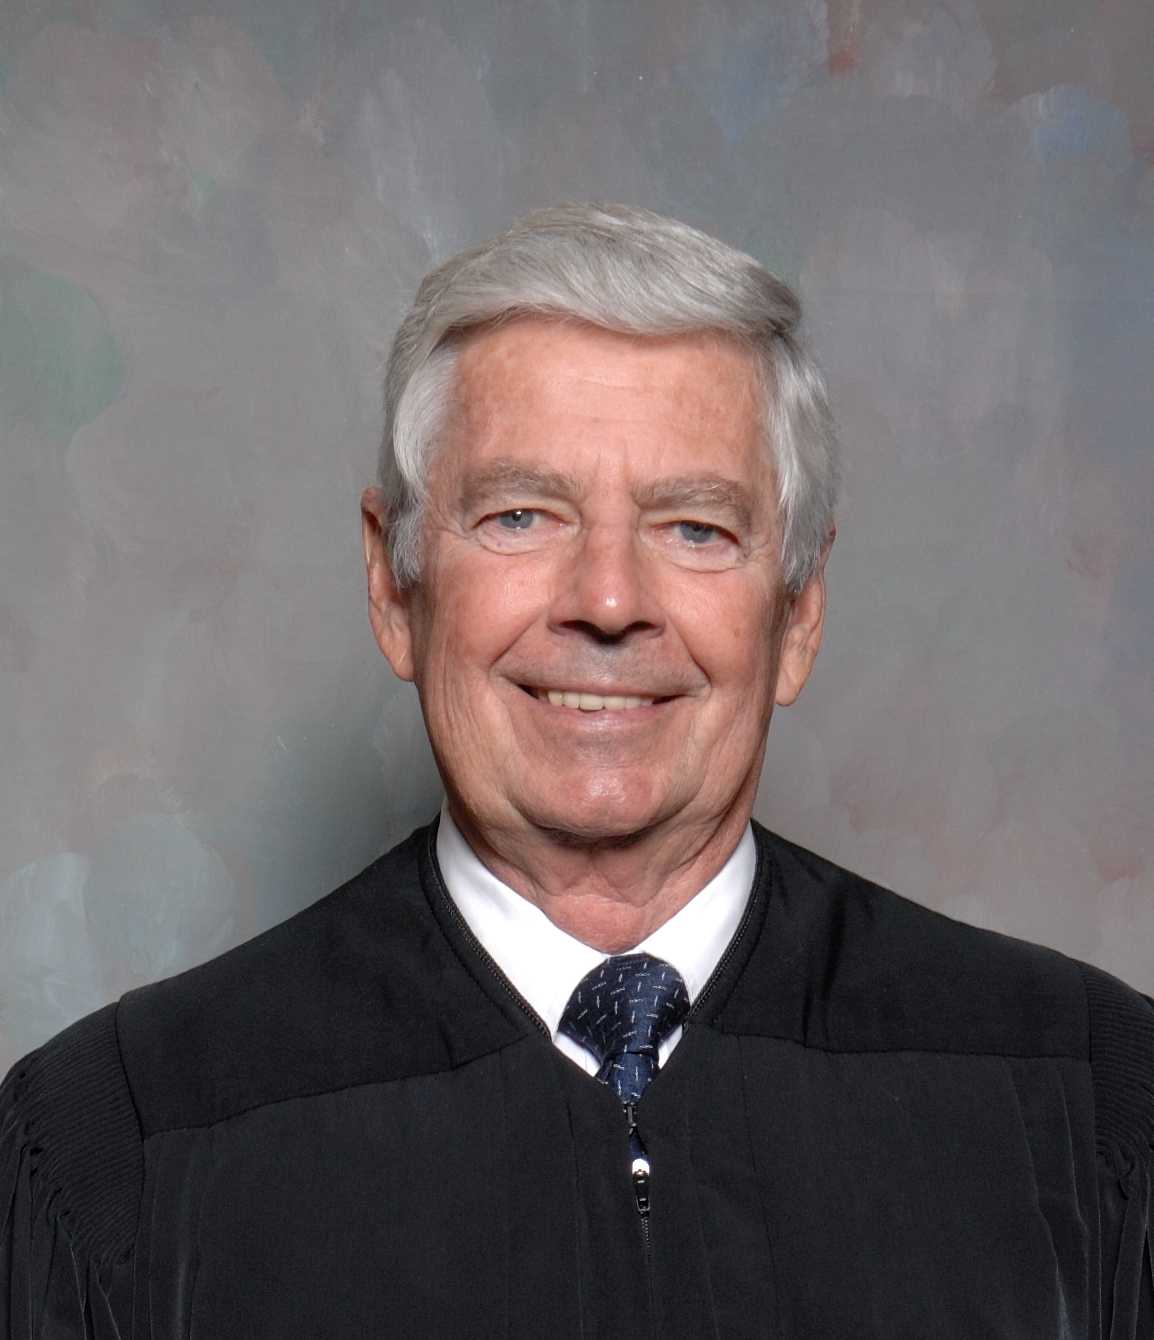 Picture of Judge Slaby.